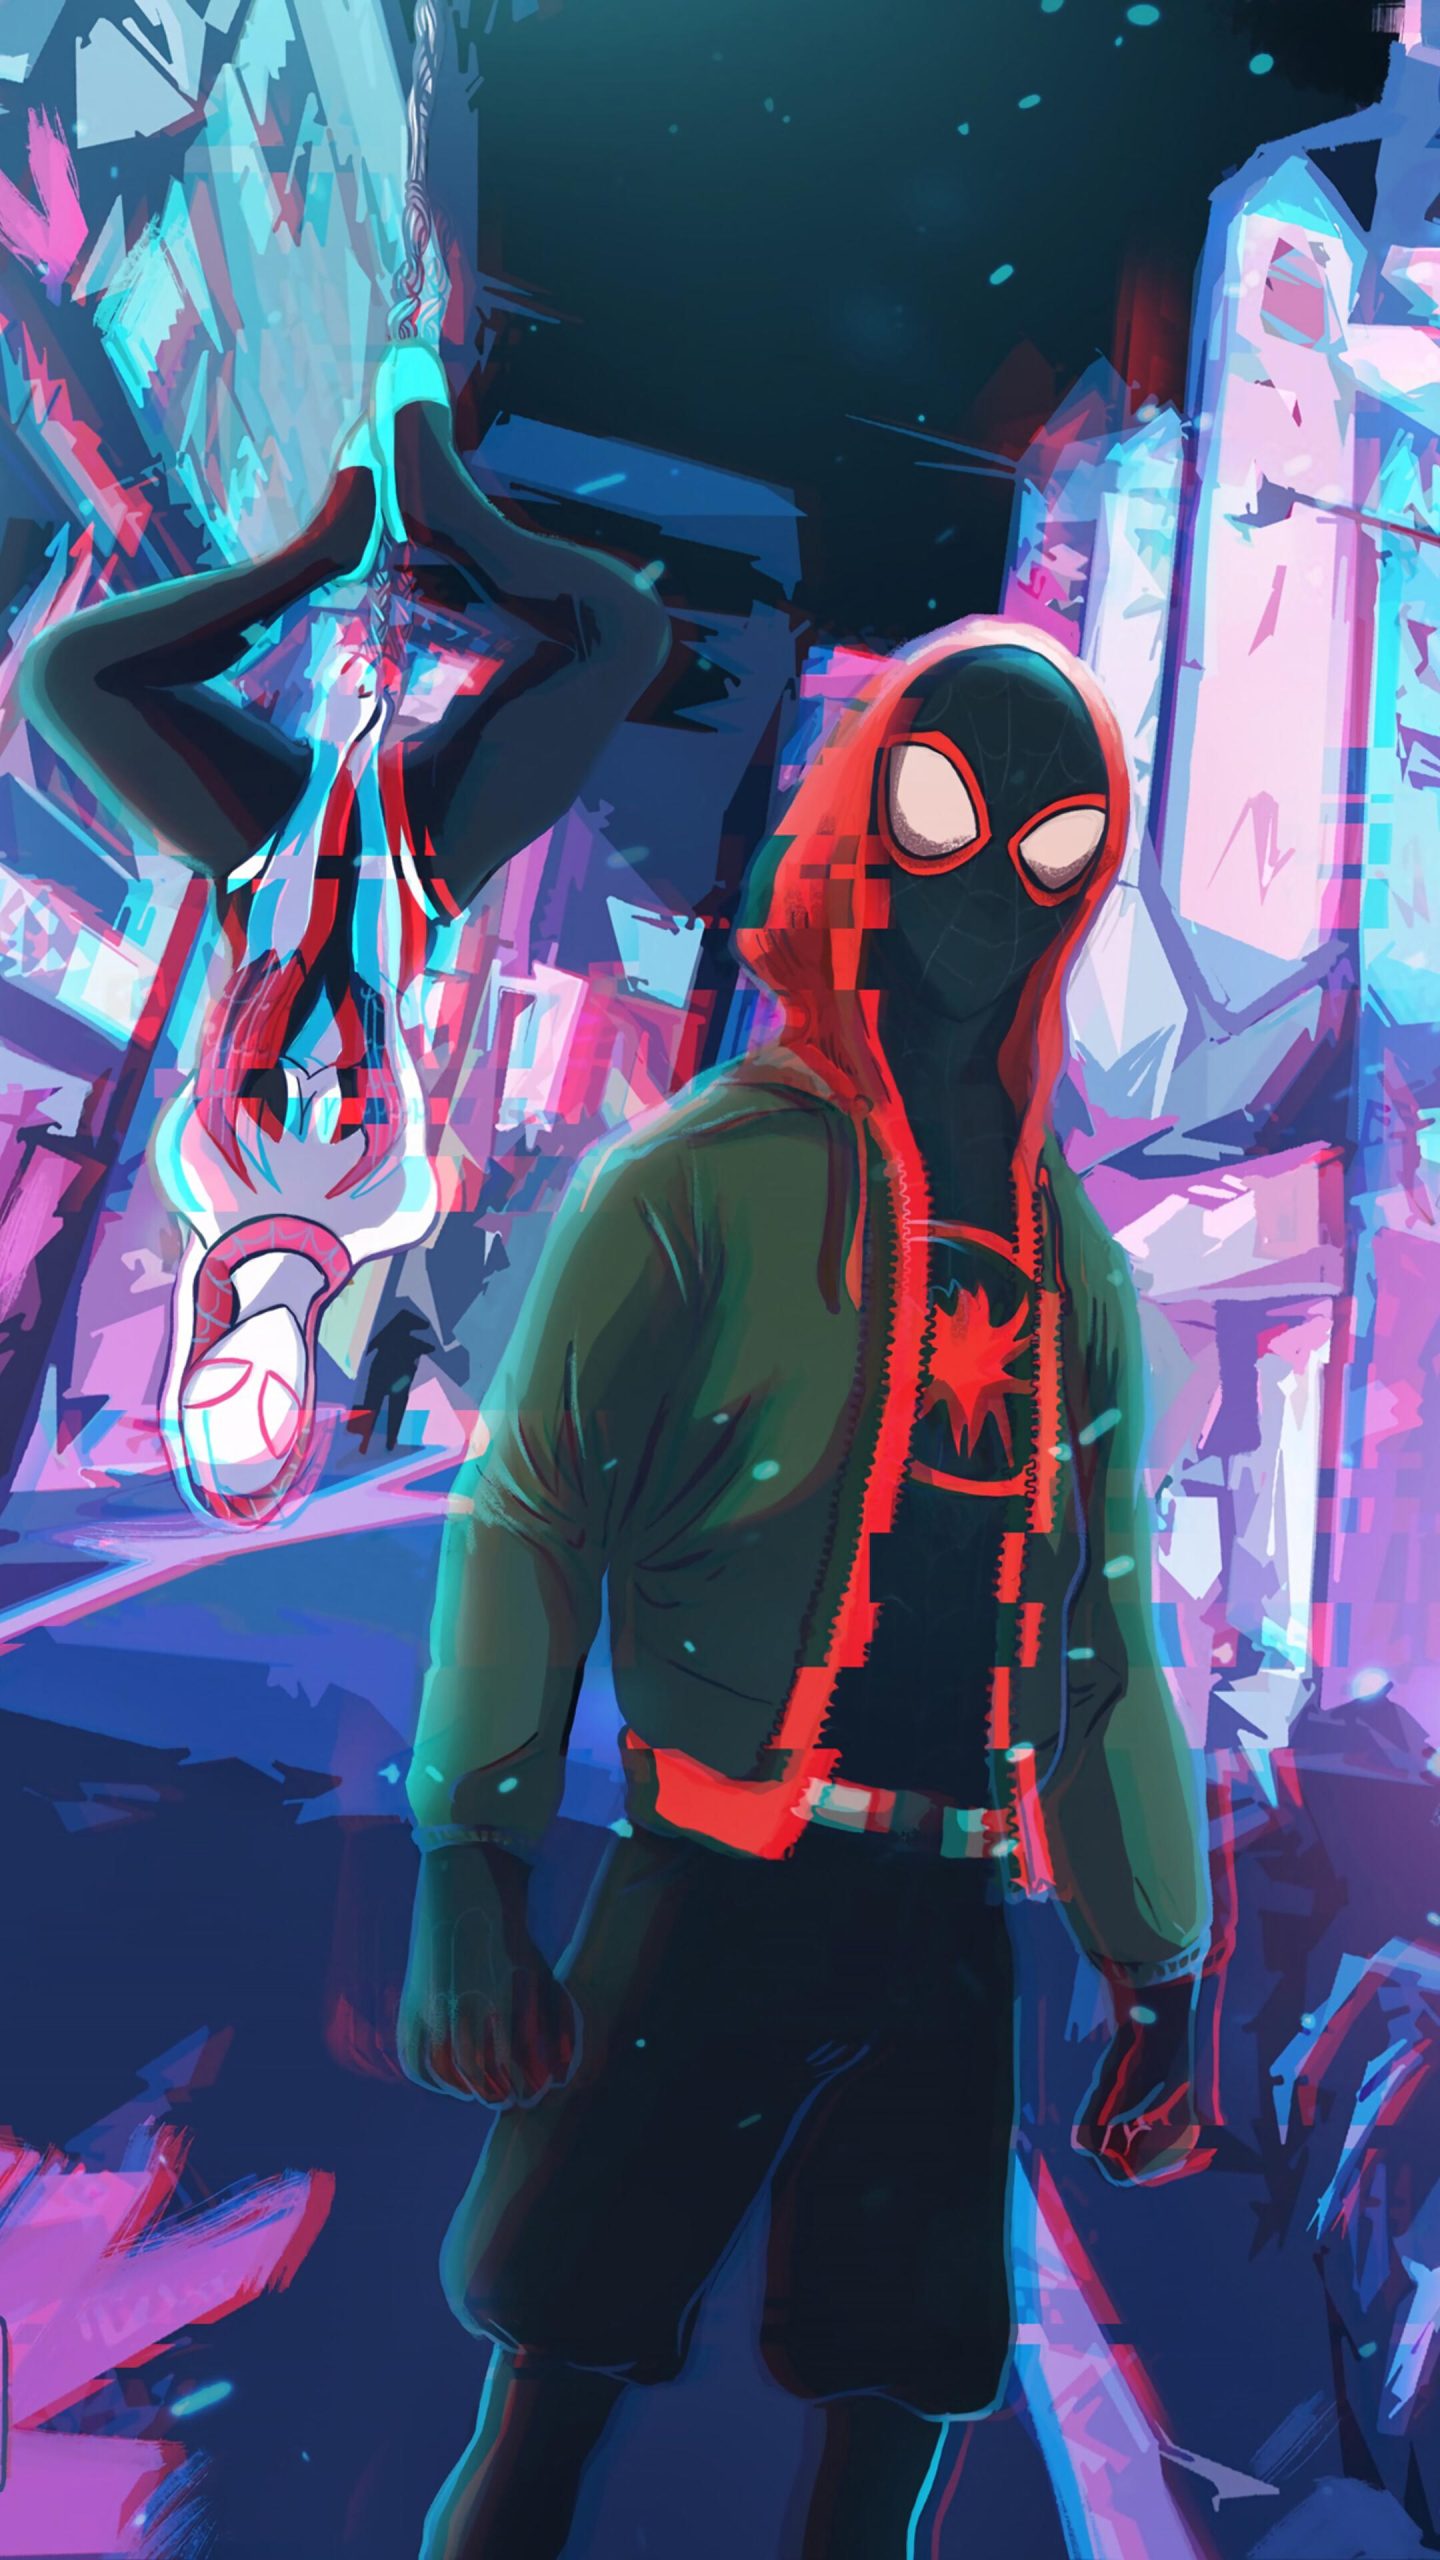 Miles Morales And Gwen Stacy Wallpaper For Ipad, Miles Morales And Gwen Stacy, Movies